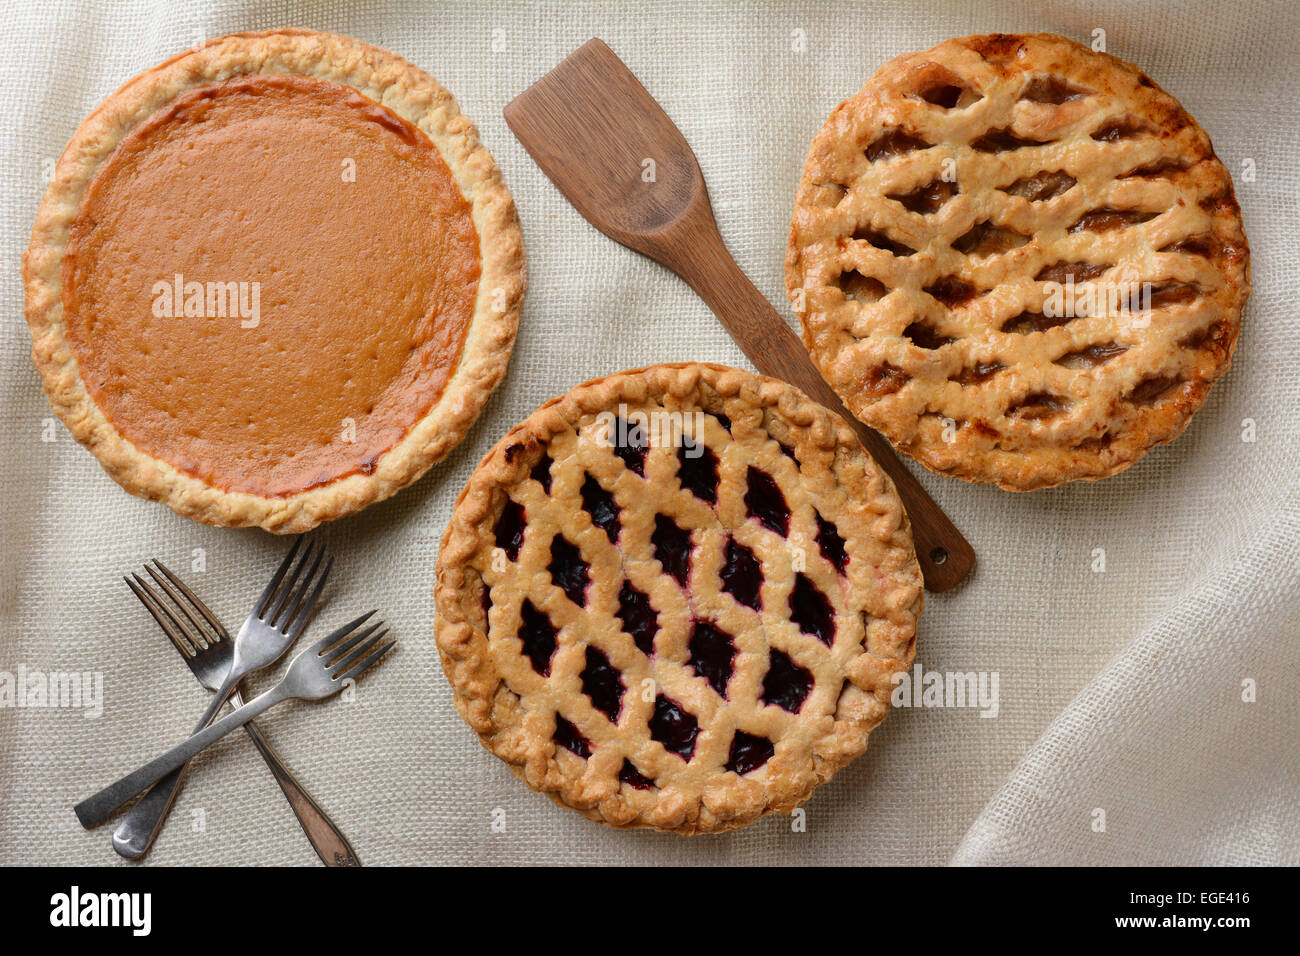 High angle shot of three fresh baked homemade pies, Apple, Cherry and Pumpkin on a burlap table cloth. Horizontal format with fo Stock Photo